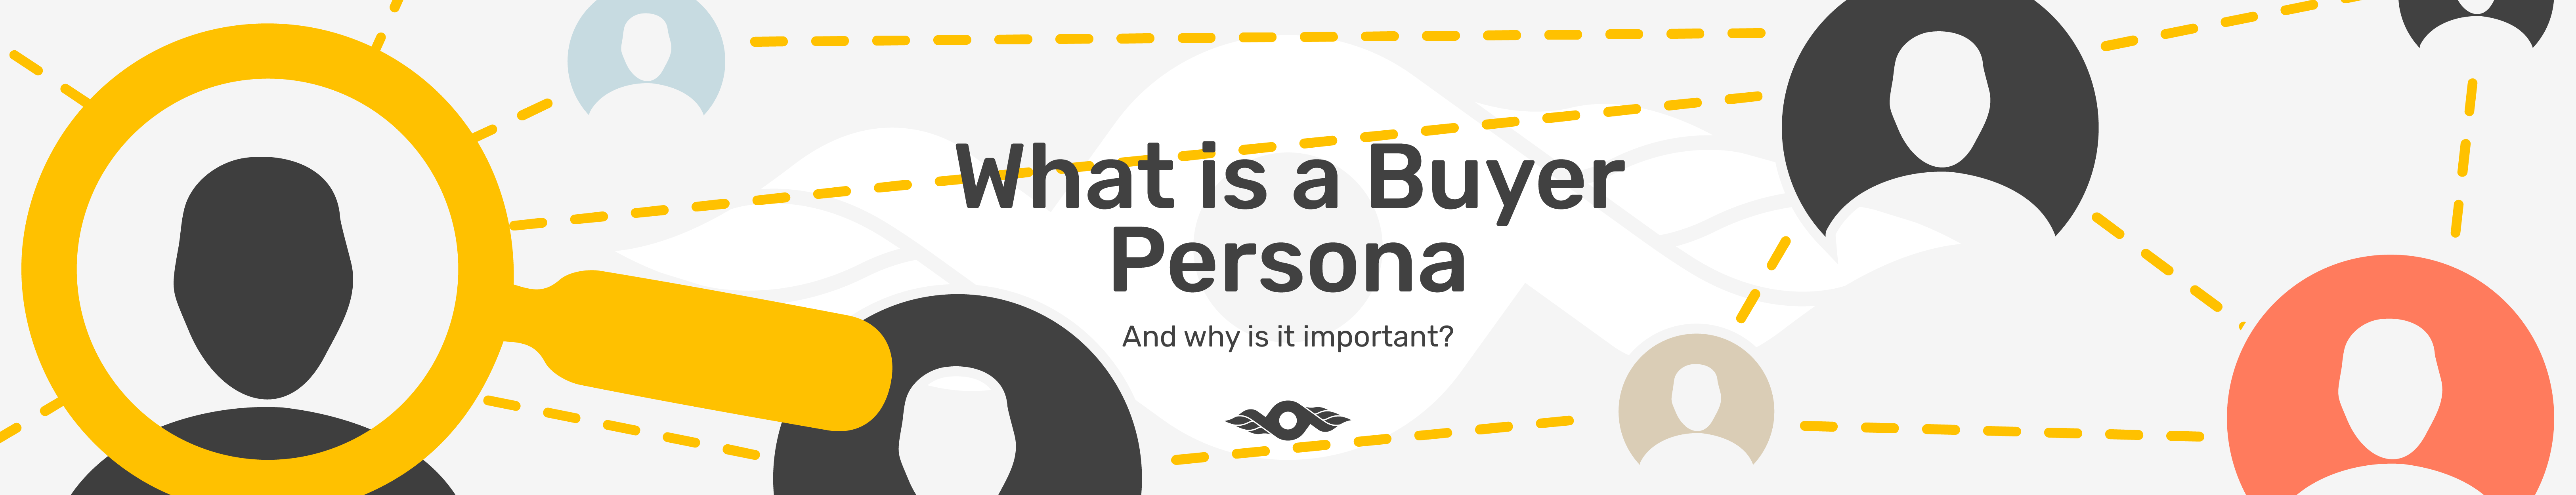 What is a buyer persona and why is it important?